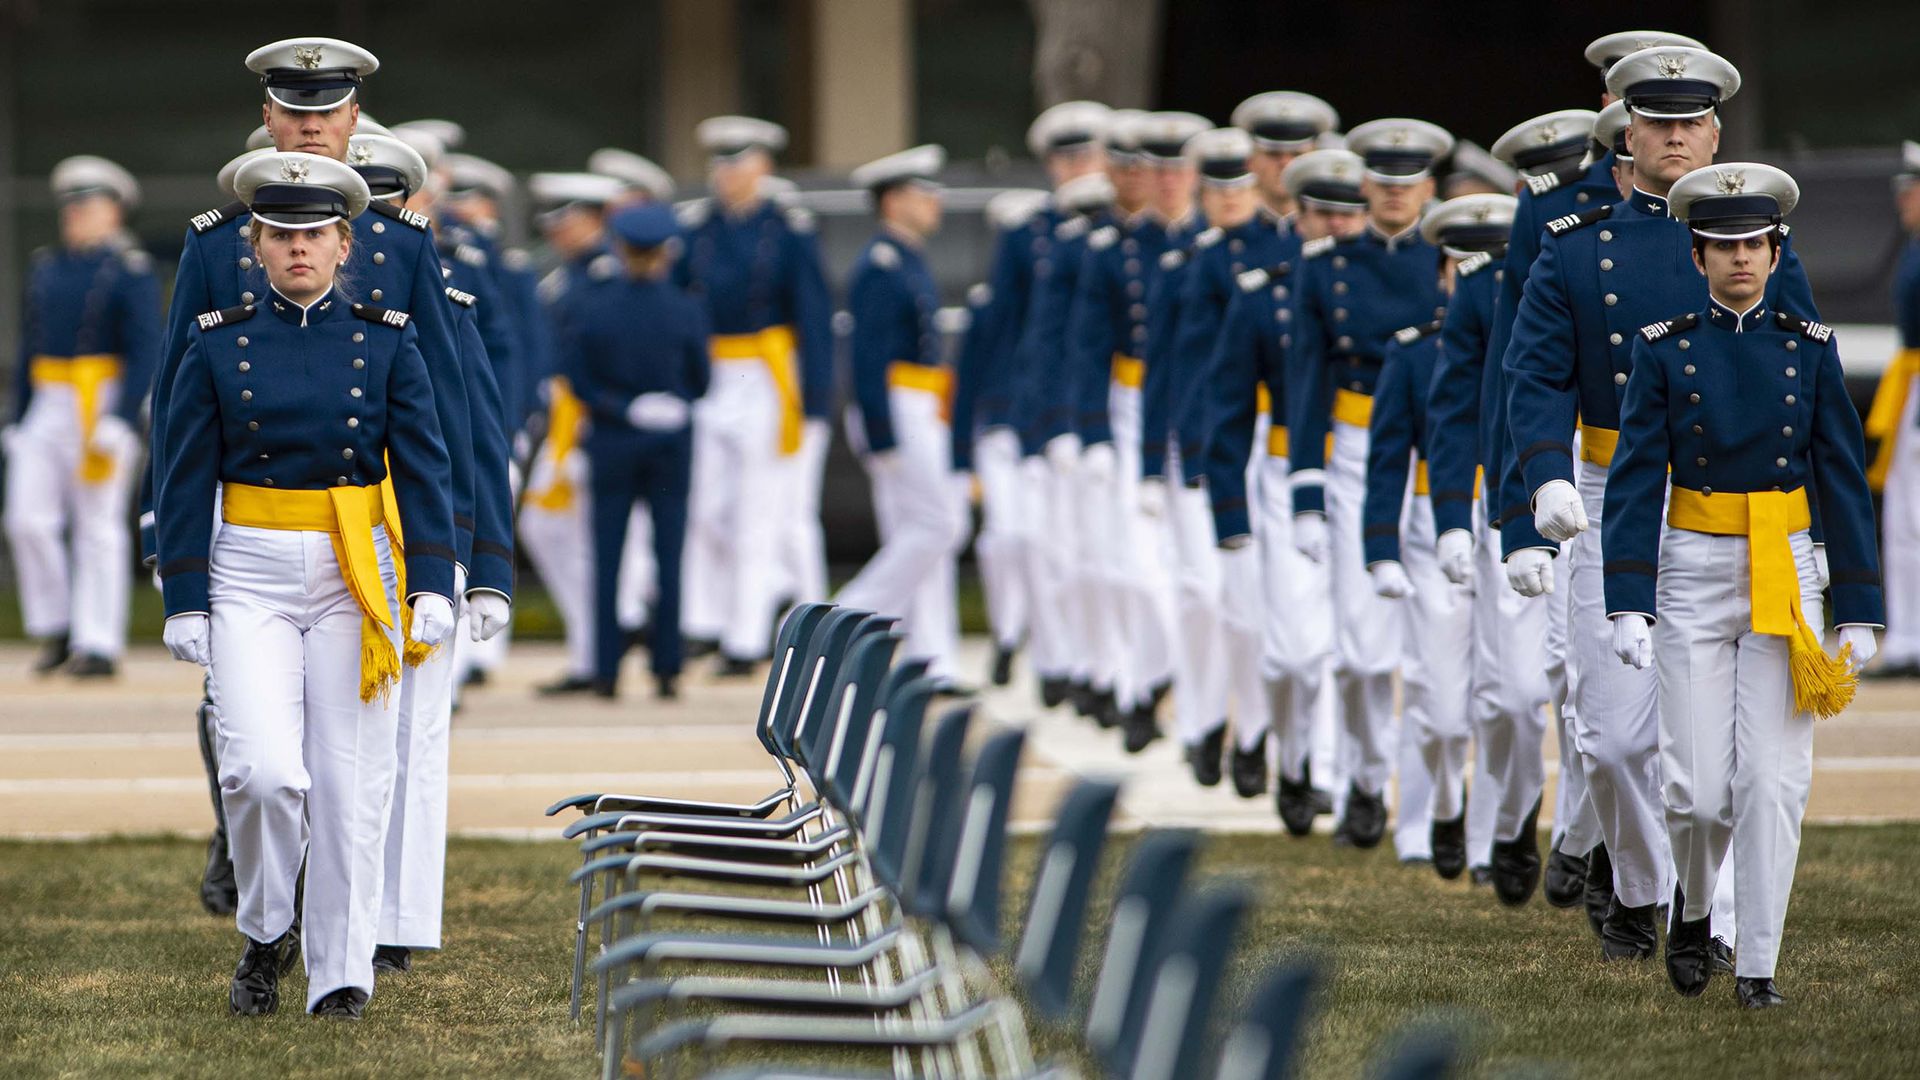 Air Force Academy cadets during a graduation ceremony in April 2020.